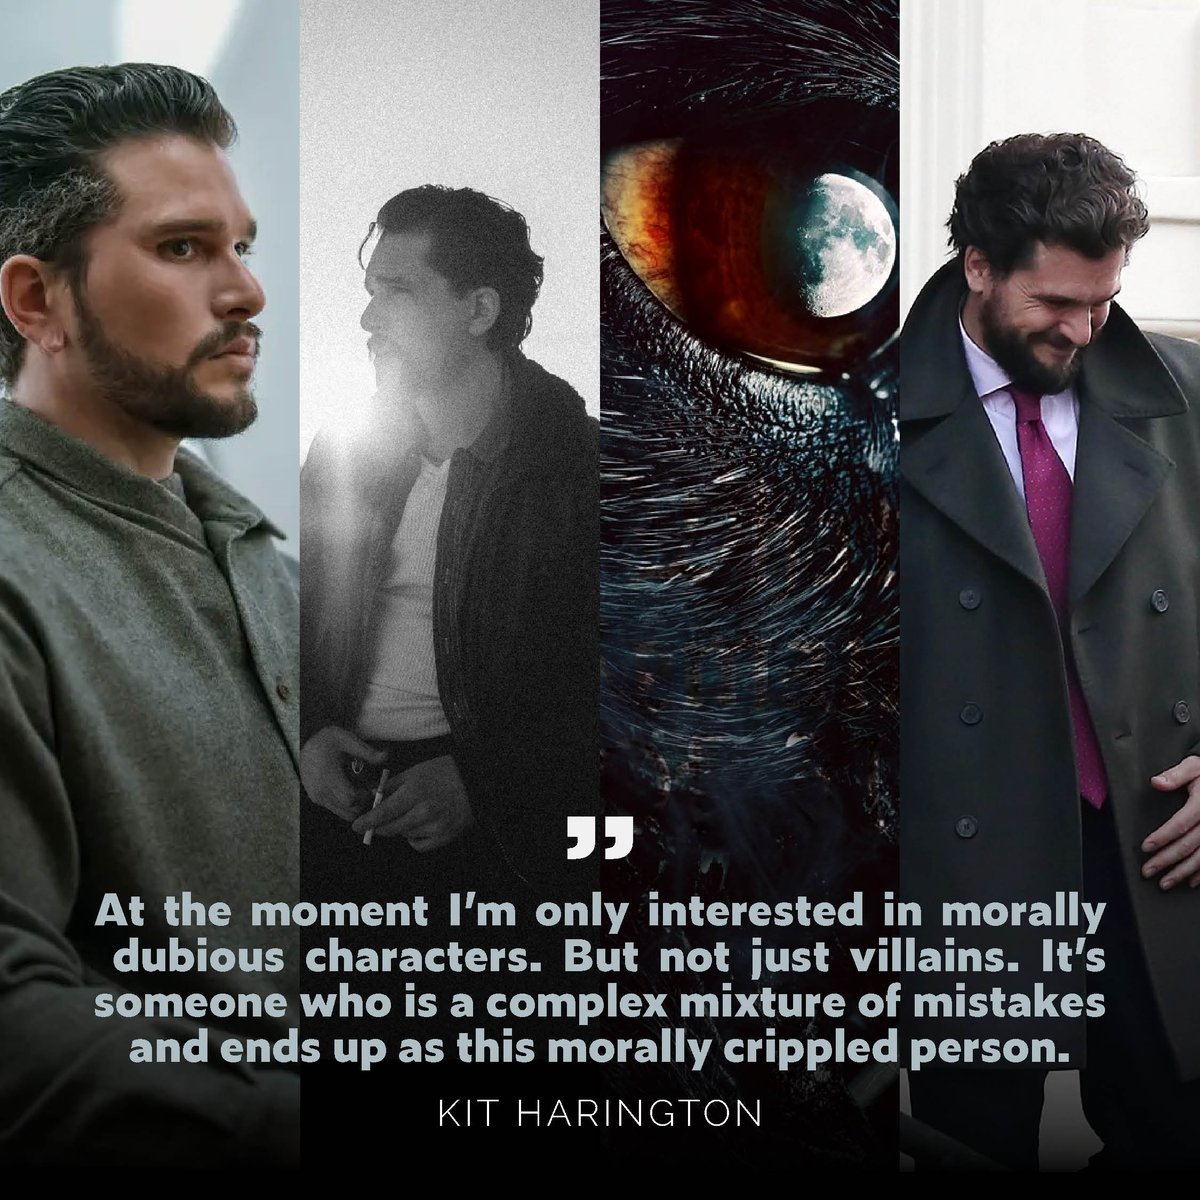 RT @sersisknight: Kit Harington on the kind of roles he is currently drawn to: https://t.co/xtvKw04i3p